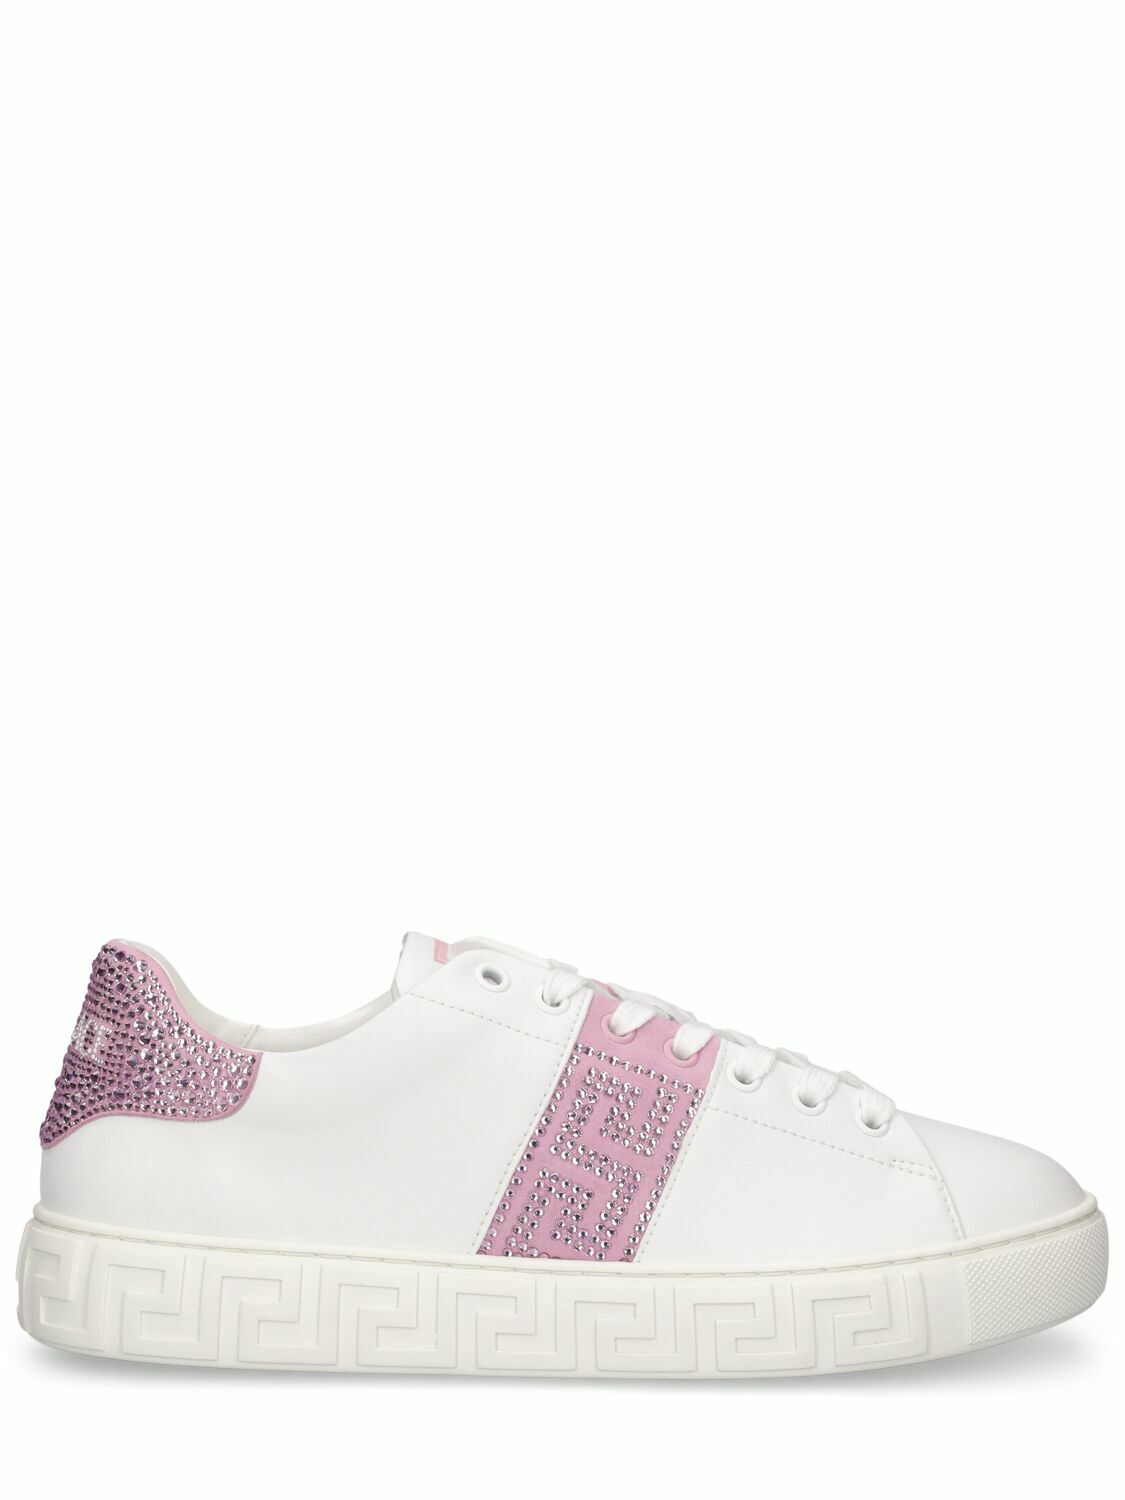 Photo: VERSACE - Faux Leather & Crystals Low Top Sneakers